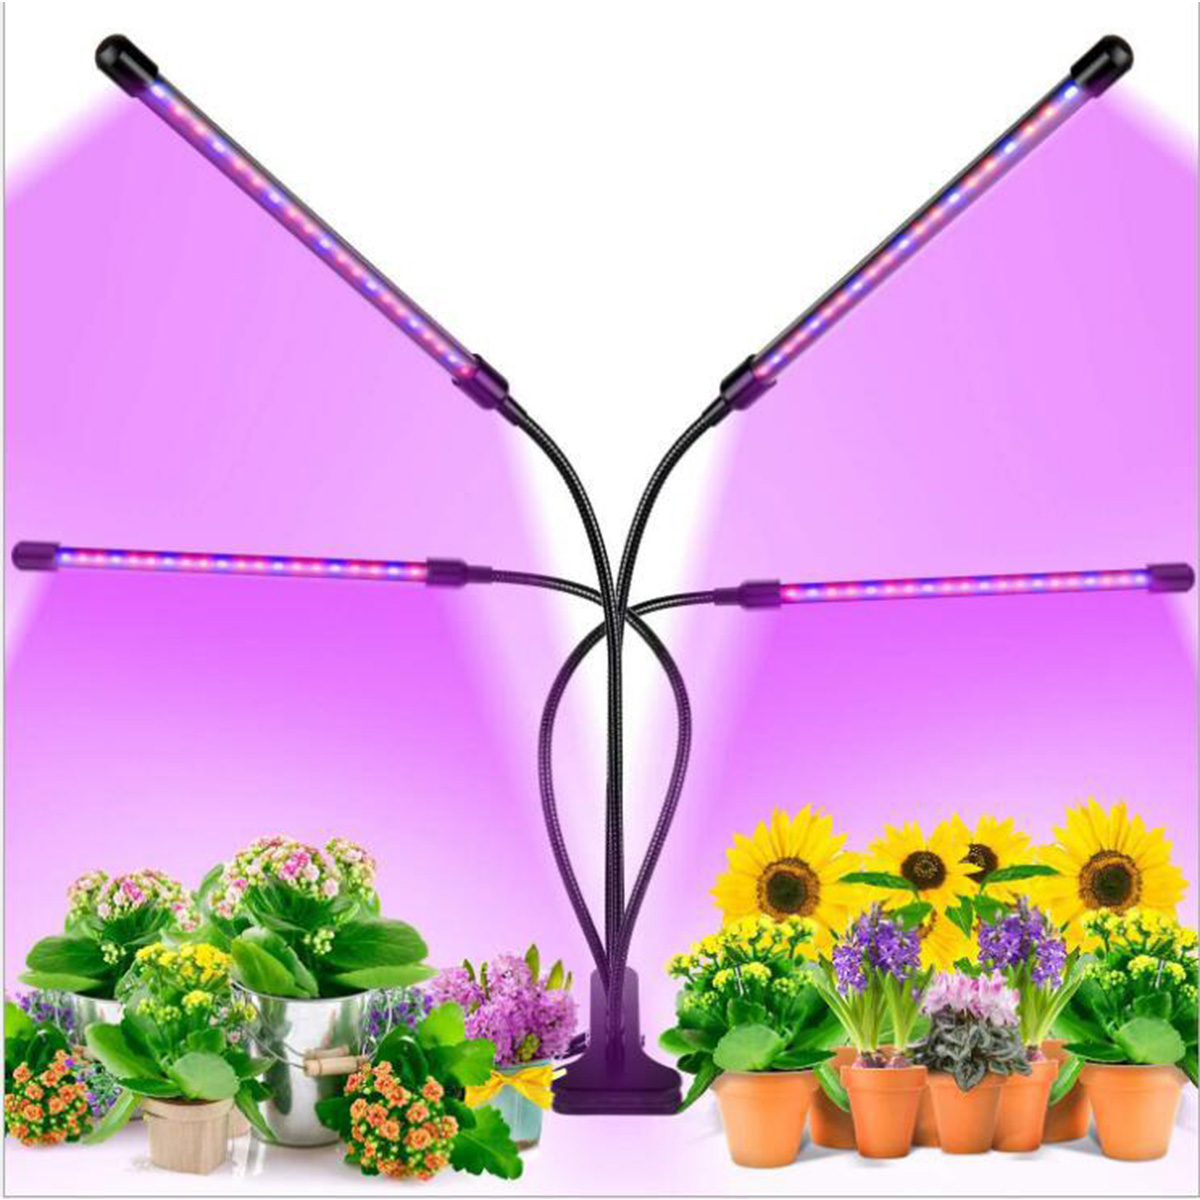 18W20W27W-234-Heads-USB-LED-Plant-Growing-Light-Clip-on-Flexible-Lamp-with-Remote-Control-DC5V-1706659-10